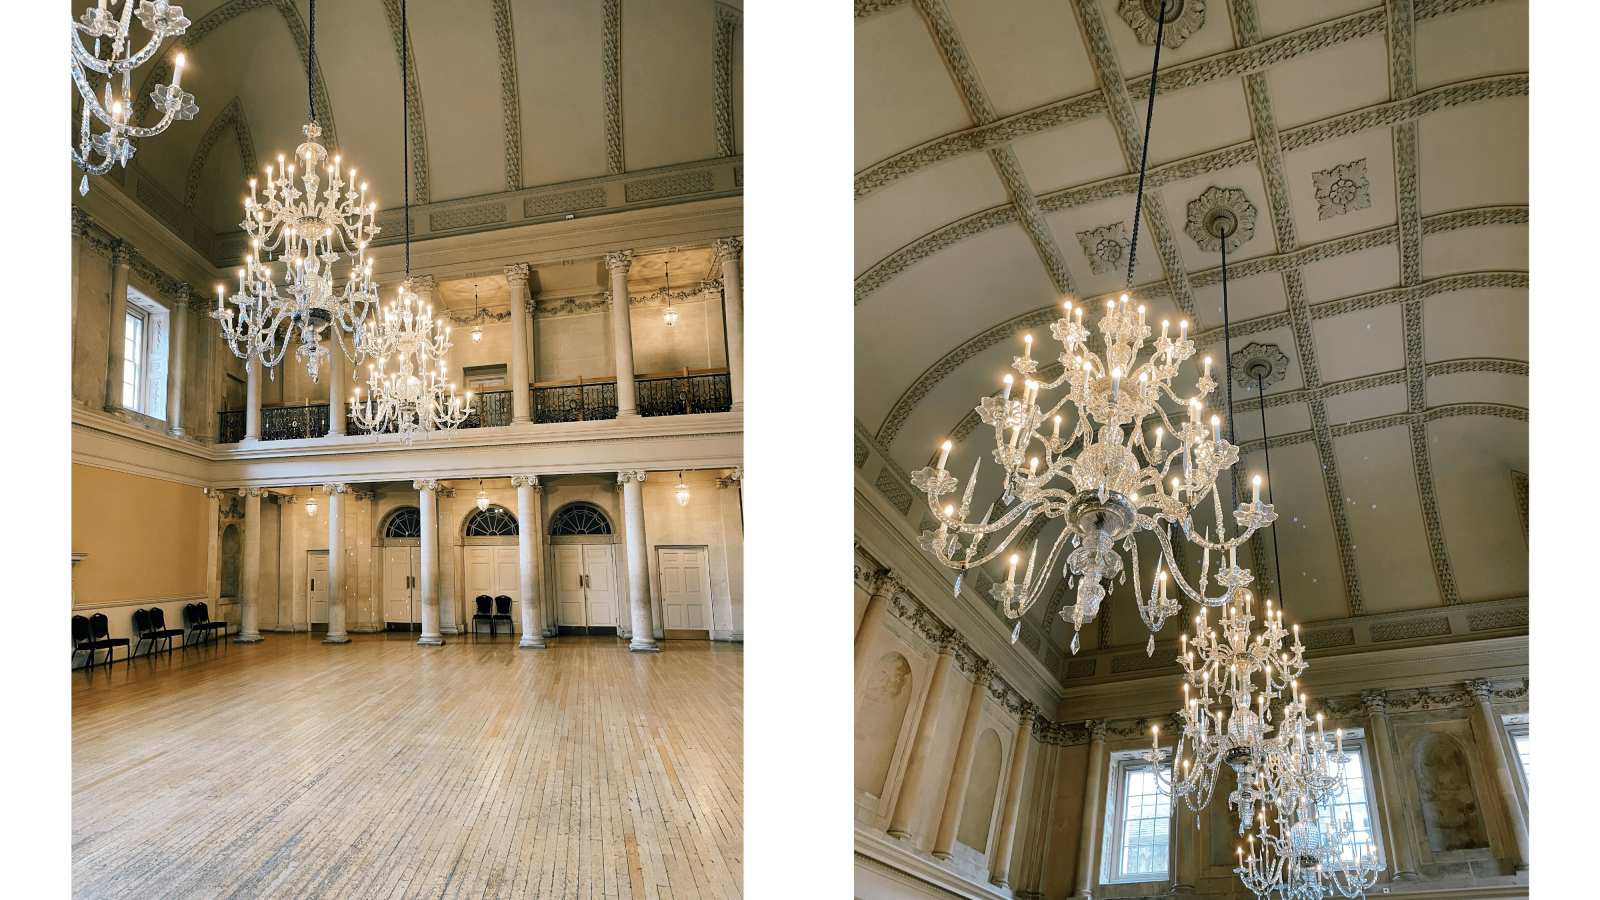 Interiors and chandeliers at the Assembly Rooms, Bath